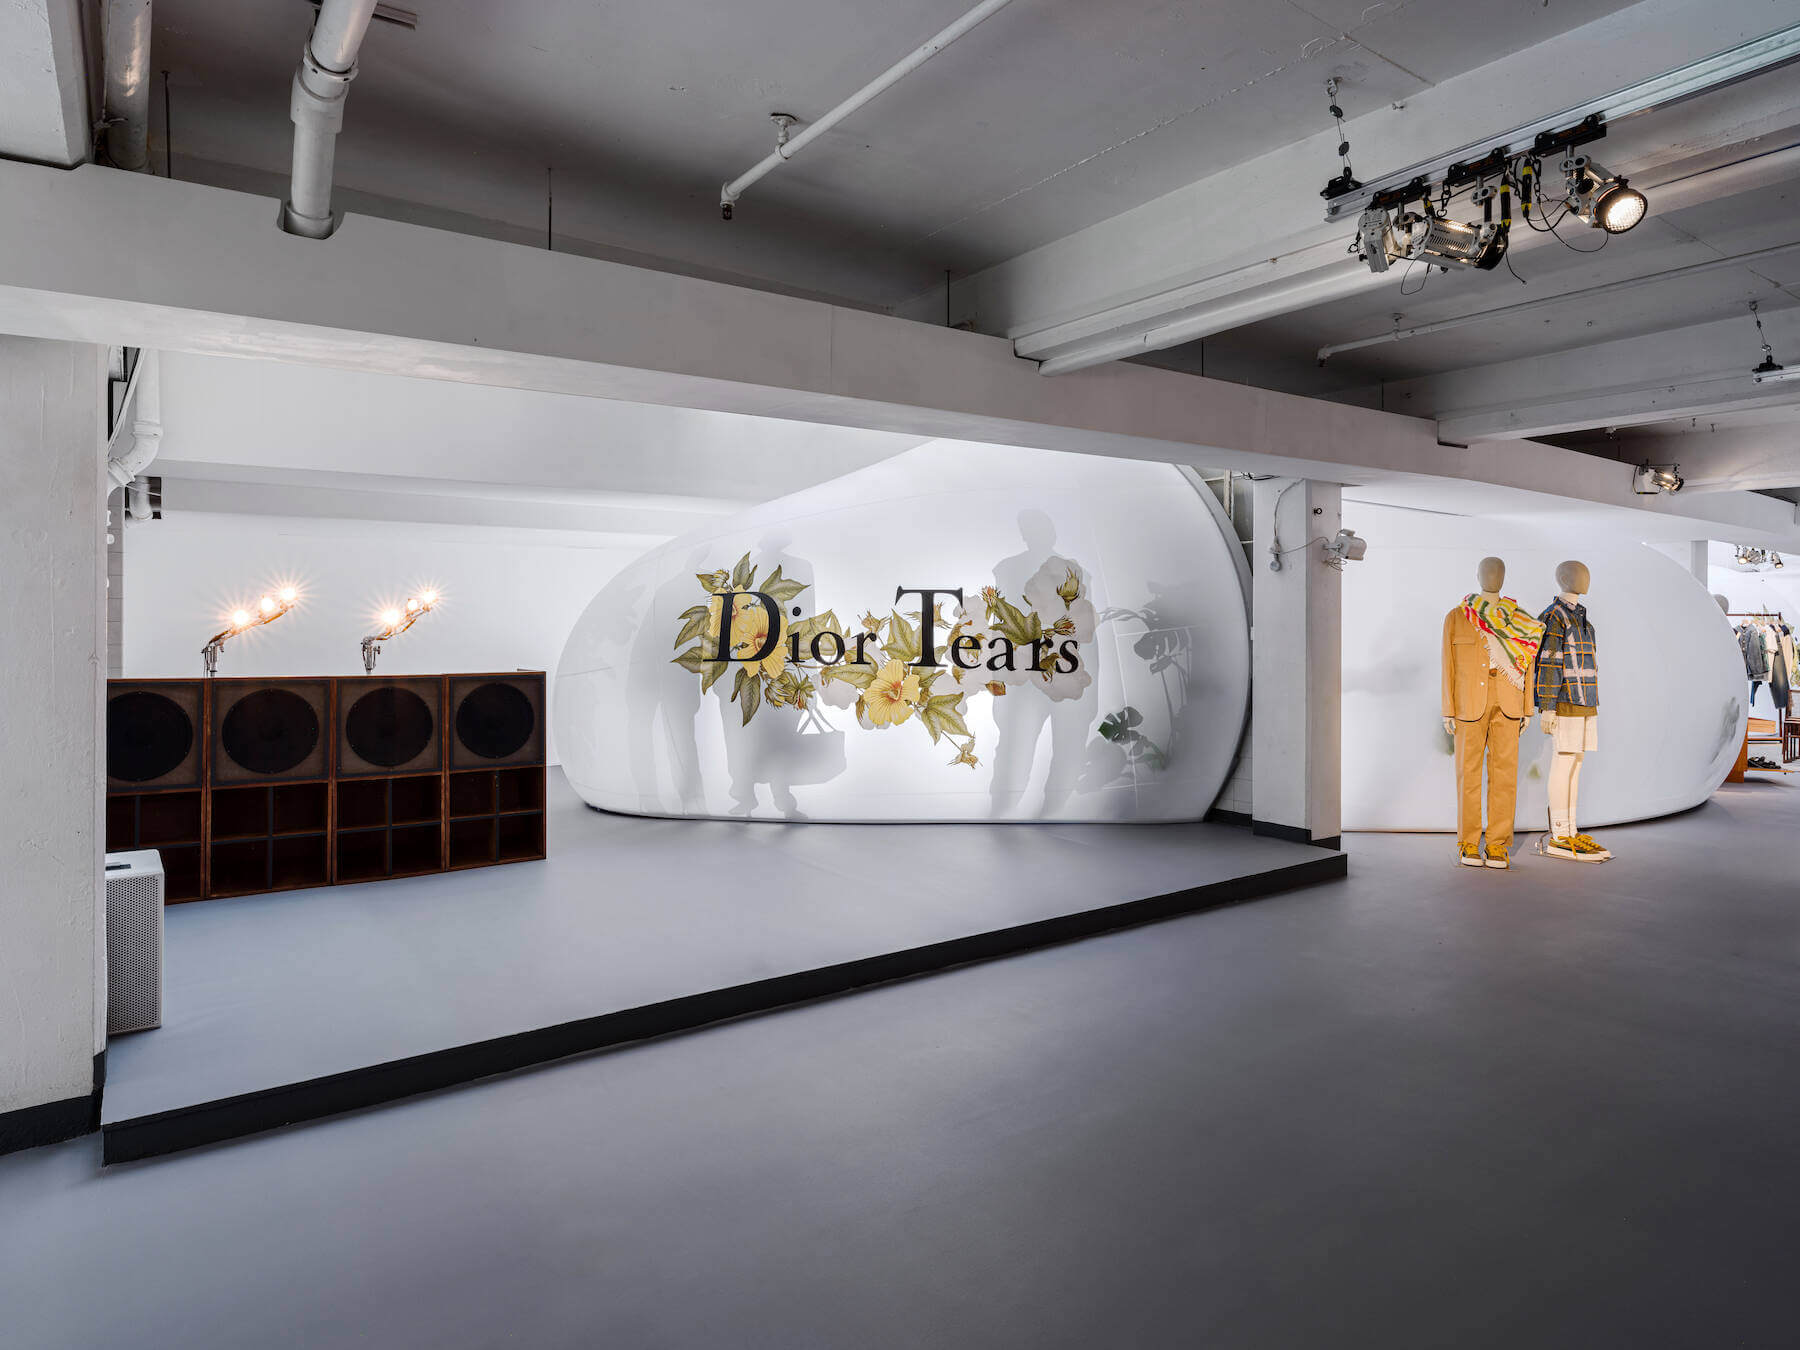 Miss Dior pop-up store and the AS SEEN BY exhibition open in Japan